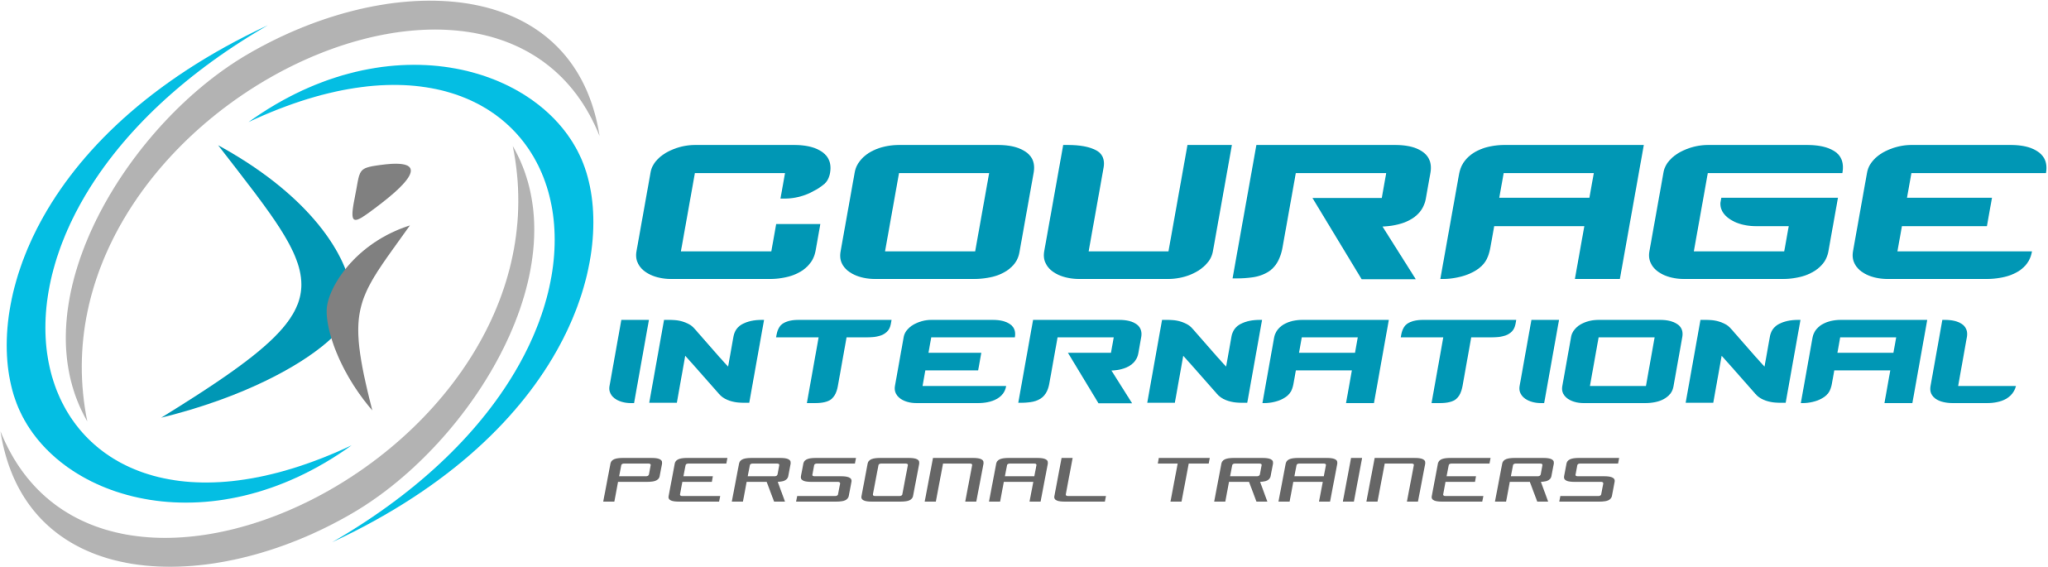 Courage International Personal Trainers